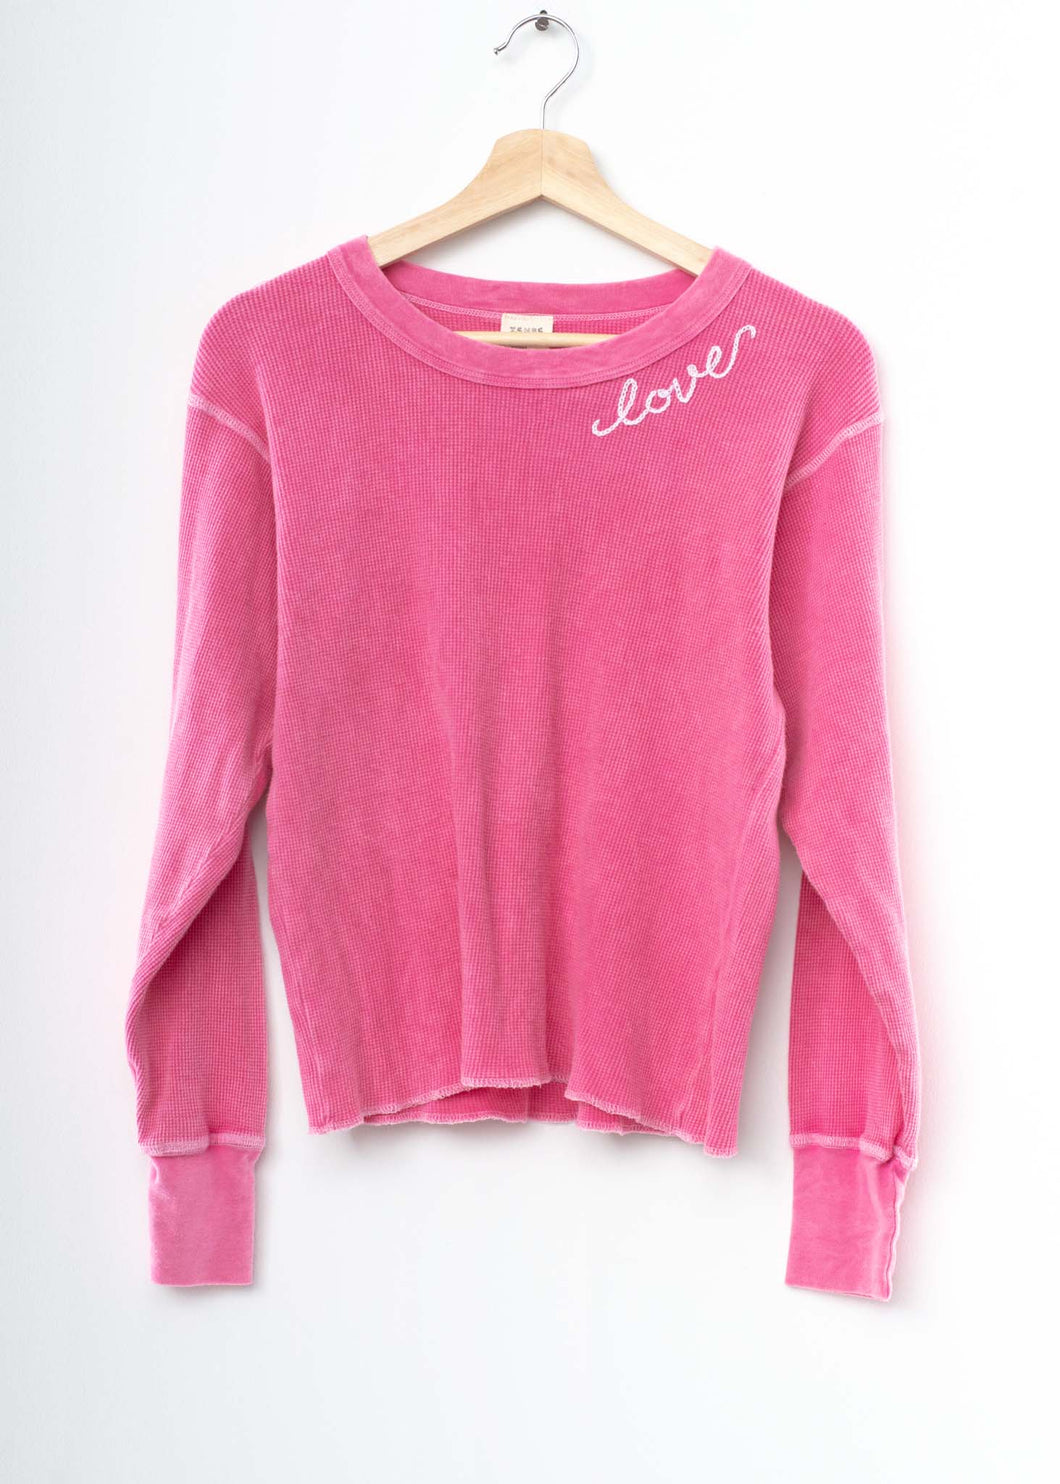 PINK  L/S THERMAL TEE  WITH CUSTOM HAND EMBROIDERY-M/L